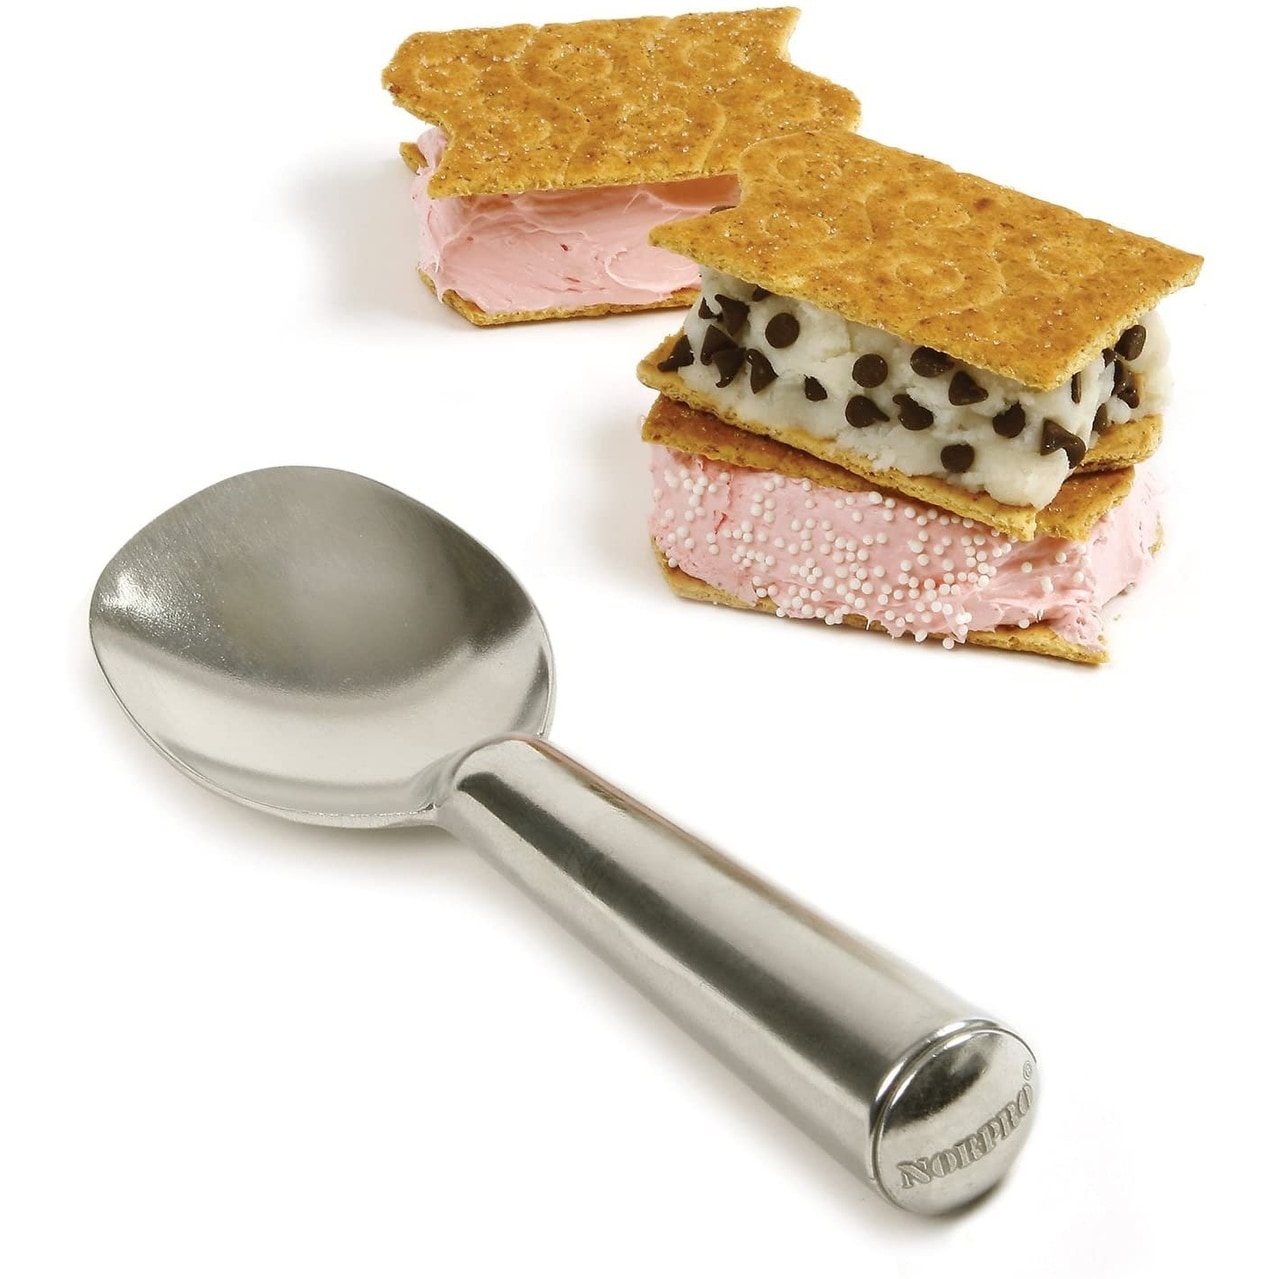 https://ak1.ostkcdn.com/images/products/is/images/direct/da2b823431388c67c5dd17e346237b1b7e8be92e/Norpro-Durable-Aluminum-Anti-Freeze-Ice-Cream-Scoop-Serving-Spade.jpg